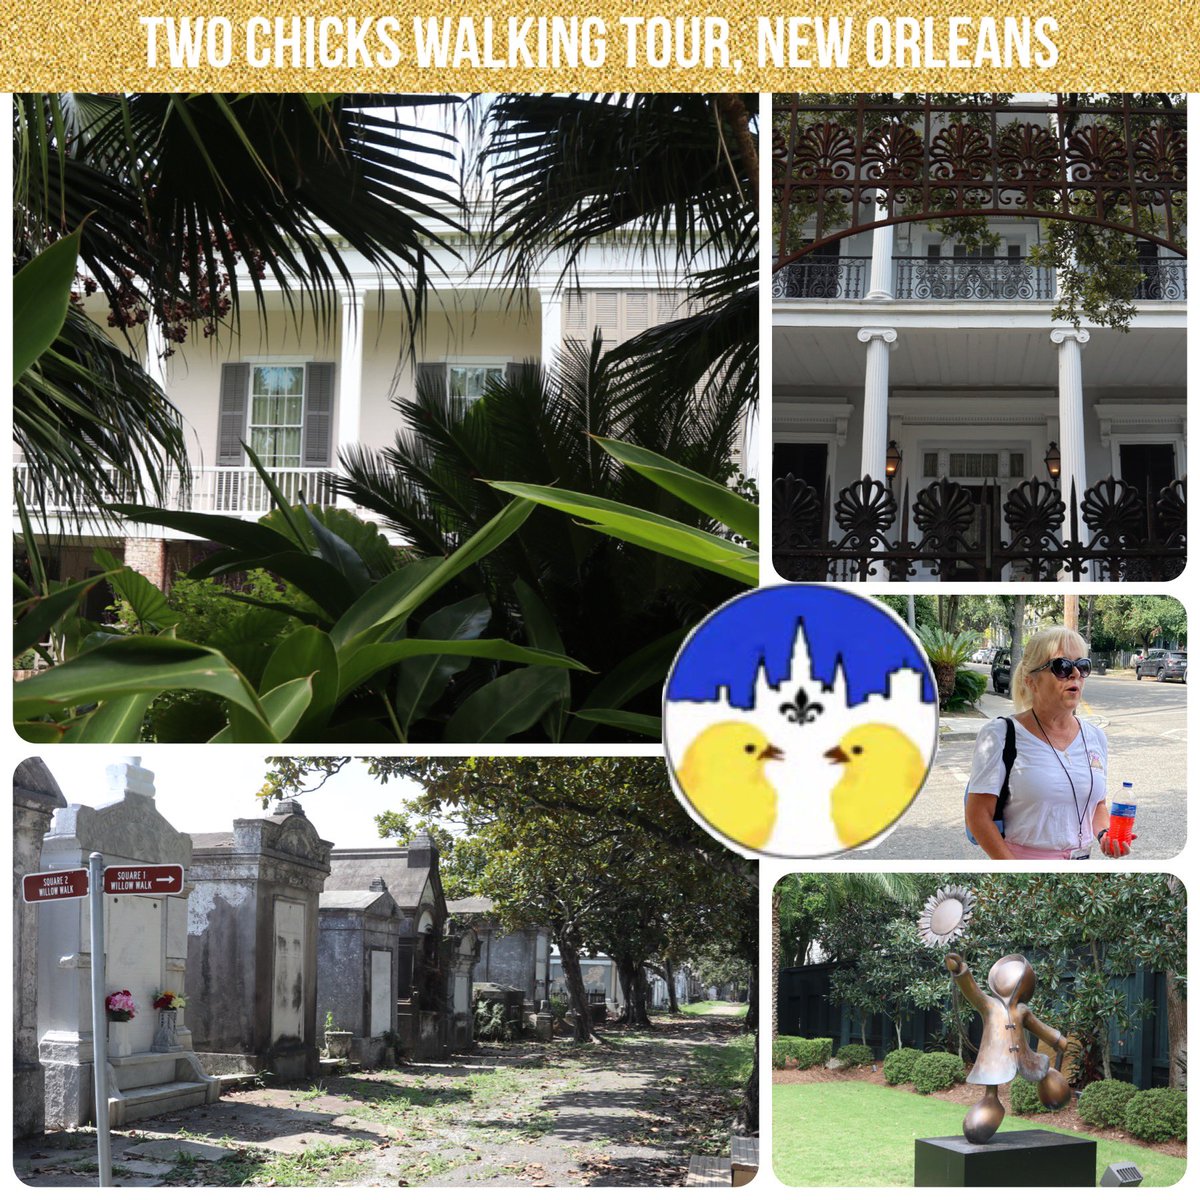 #Comprehensive #GardenDistrictNOLA #tour with #twochickswalkingtours led by #DeAnnaDuPont, who knows #EVERYTHING about GD! #somanystories Oldest house, famous owners, #SunflowerGirl so lovely 🥹 #NewOrleansMustDo #neworleans 
#explorelouisiana
#RoadTestingTheWorld
#ThePackedBag